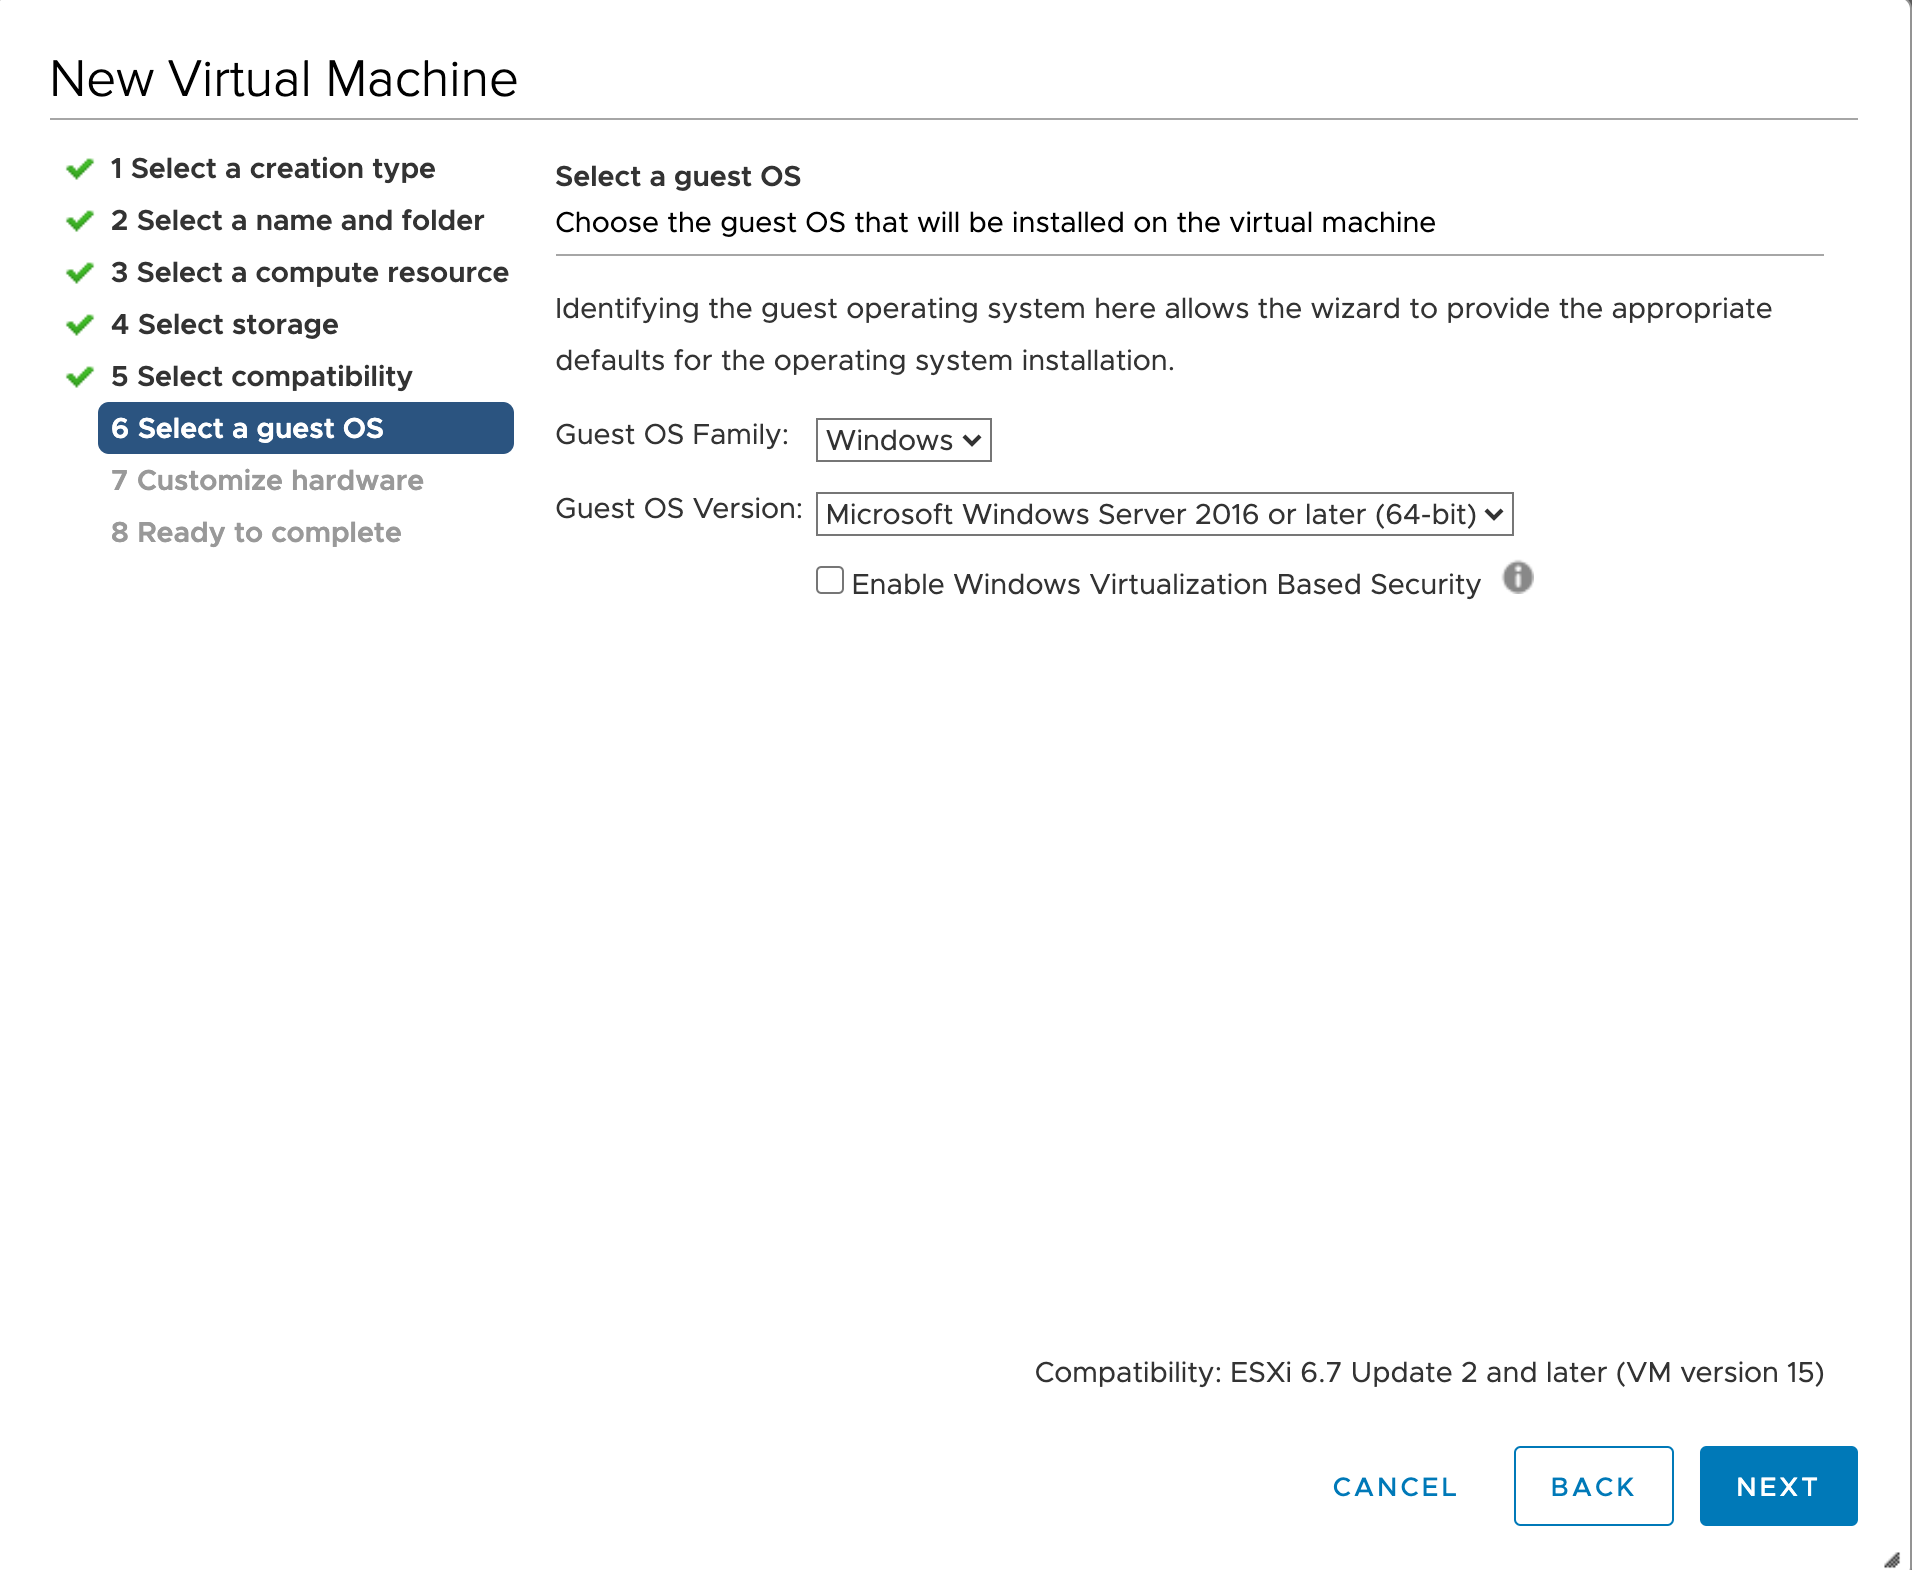 Screenshot of the "Select a guest OS" section of the New Virtual Machine creation pane.